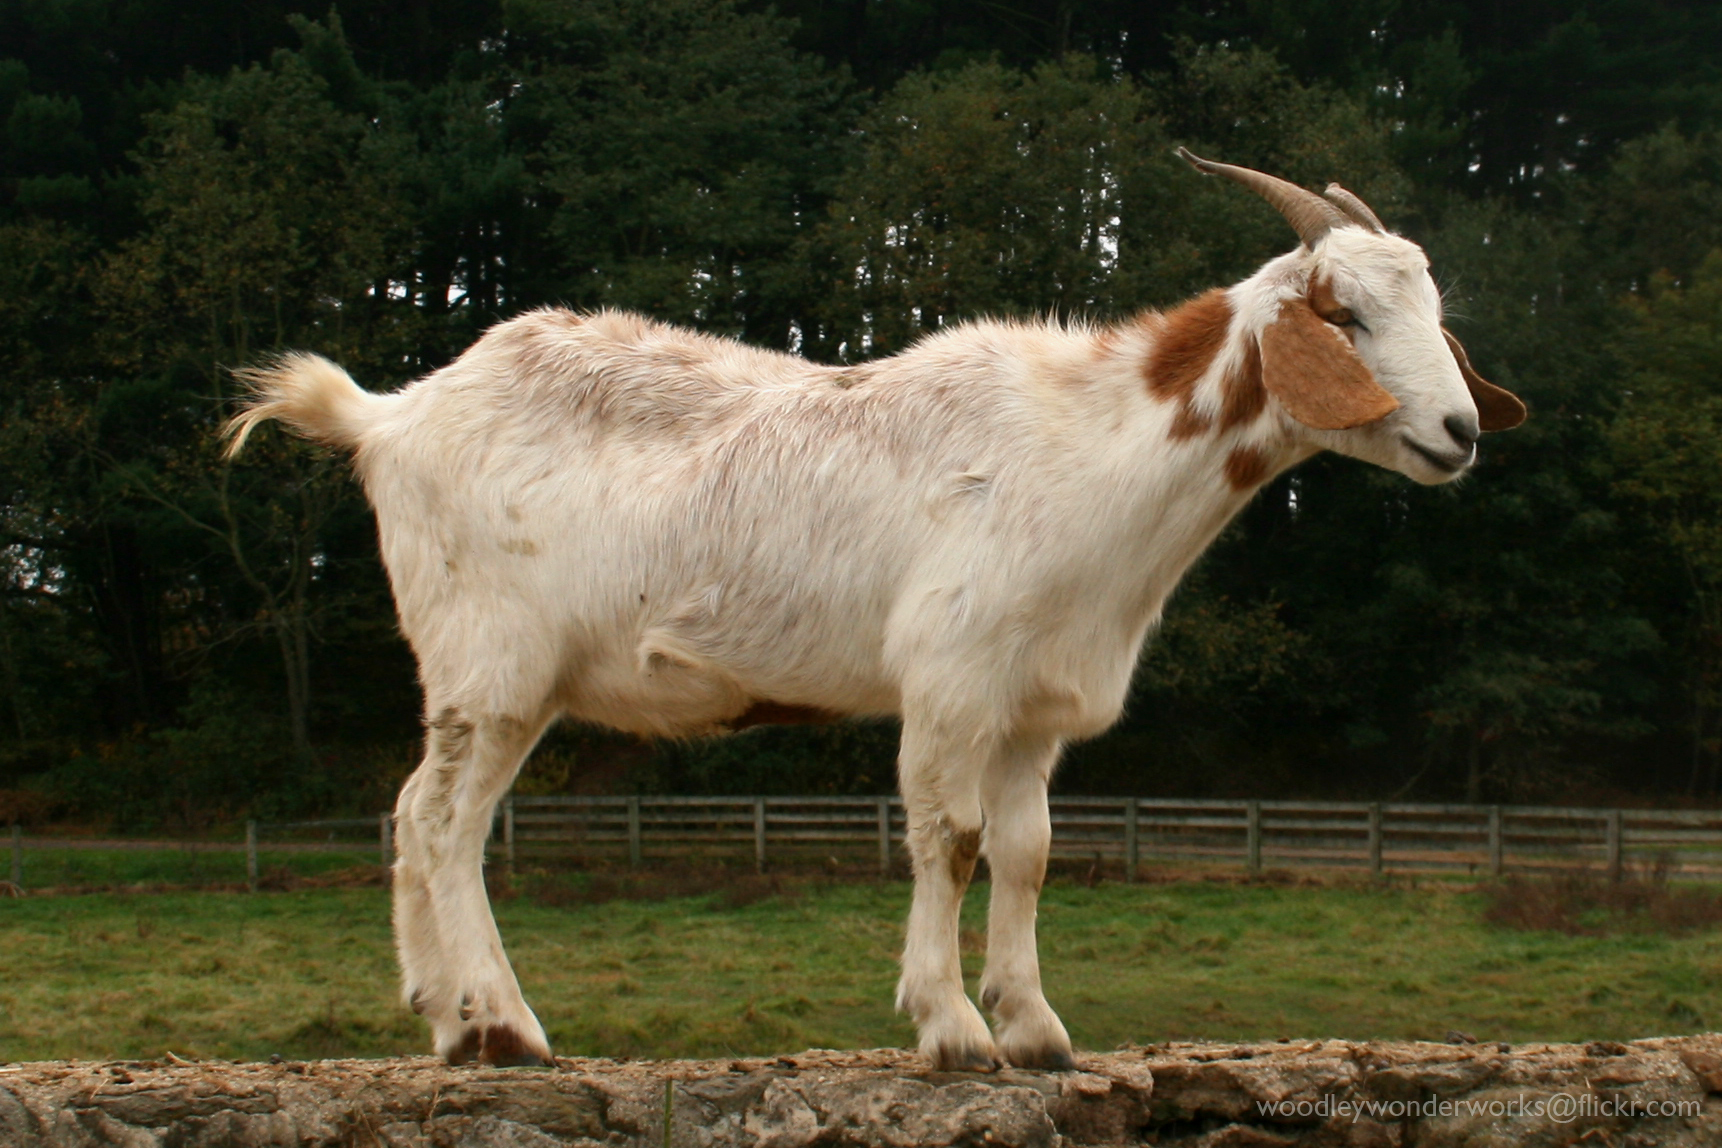 the large horned goat is standing alone by himself